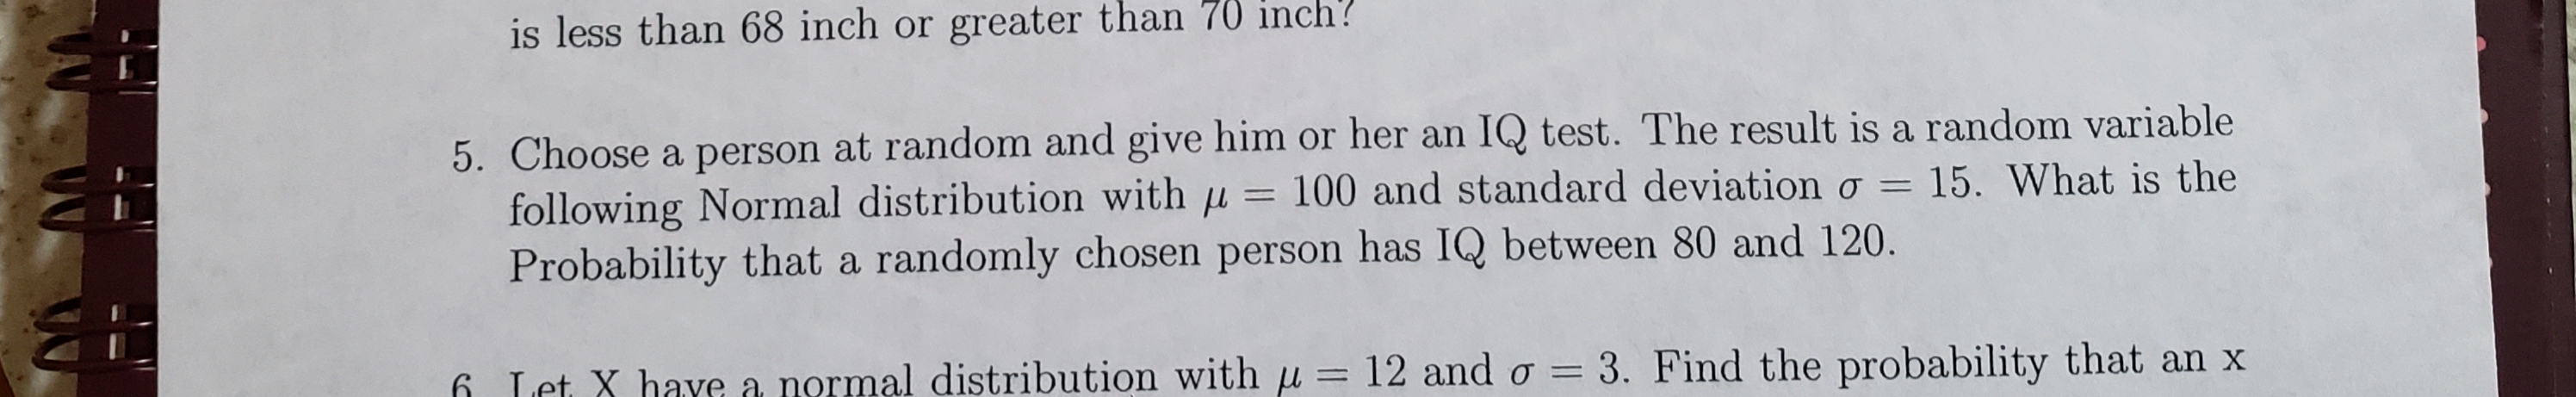 is less than 68 inch or greater than 70 inch?
5. Choose a person at random and give him or her an IQ test. The result is a random variable
following Normal distribution with u = 100 and standard deviationo =
Probability that a randomly chosen person has IQ between 80 and 120.
15. What is the
6 Let X have a normal distribution with u 12 and o = 3. Find the probability that an x
